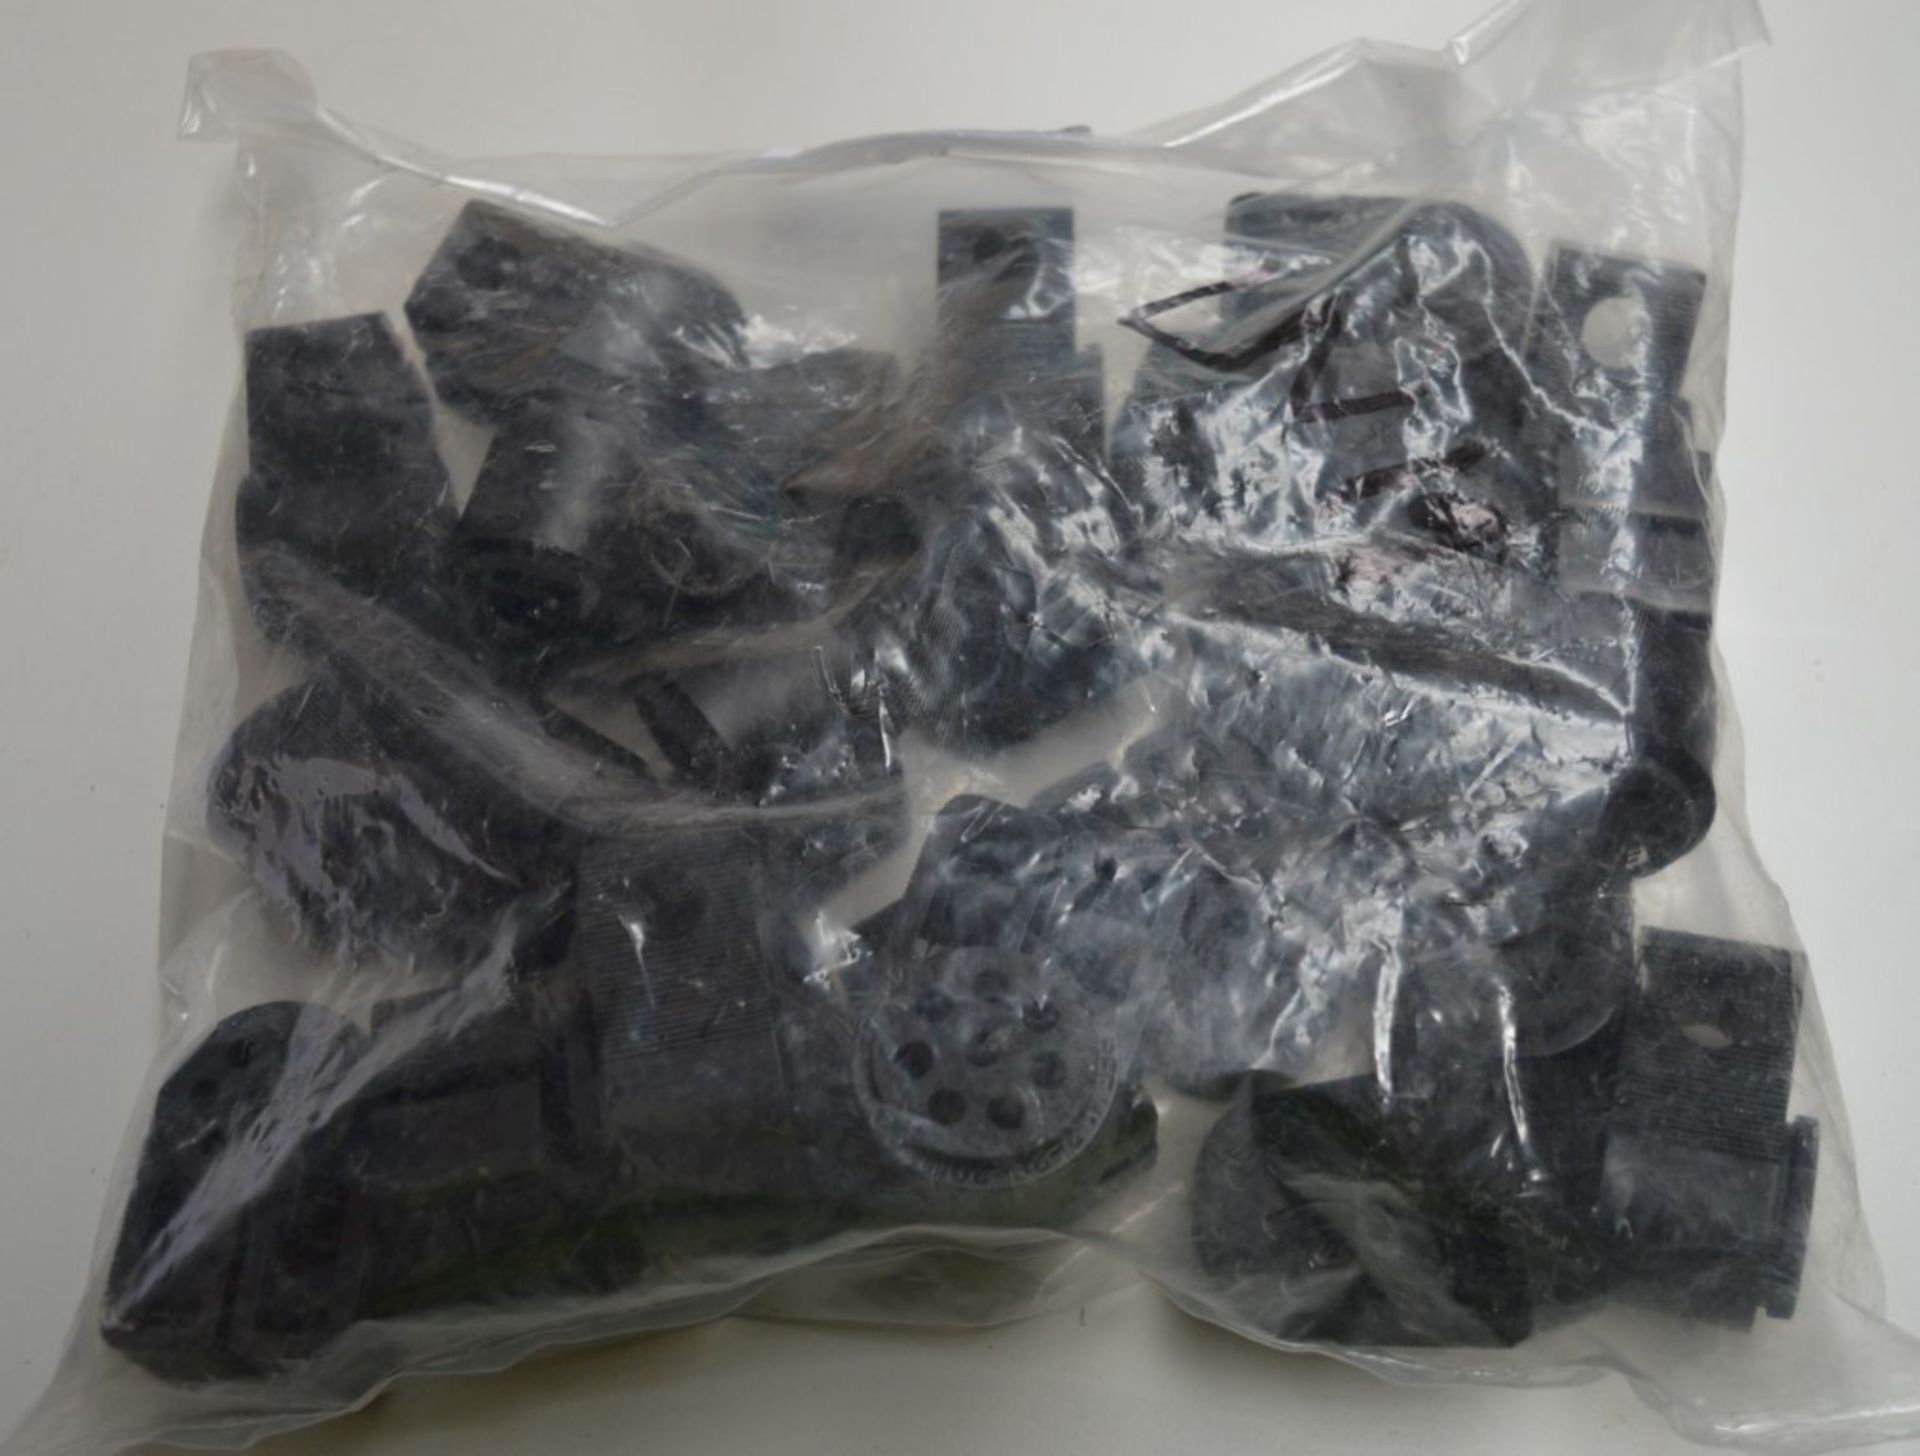 25 x Black Cleats With 8 x 4.8mm Hole Cable Bungs - Unused Bag of 25 - Type GCA BW1.2 HS8 - - Image 6 of 12